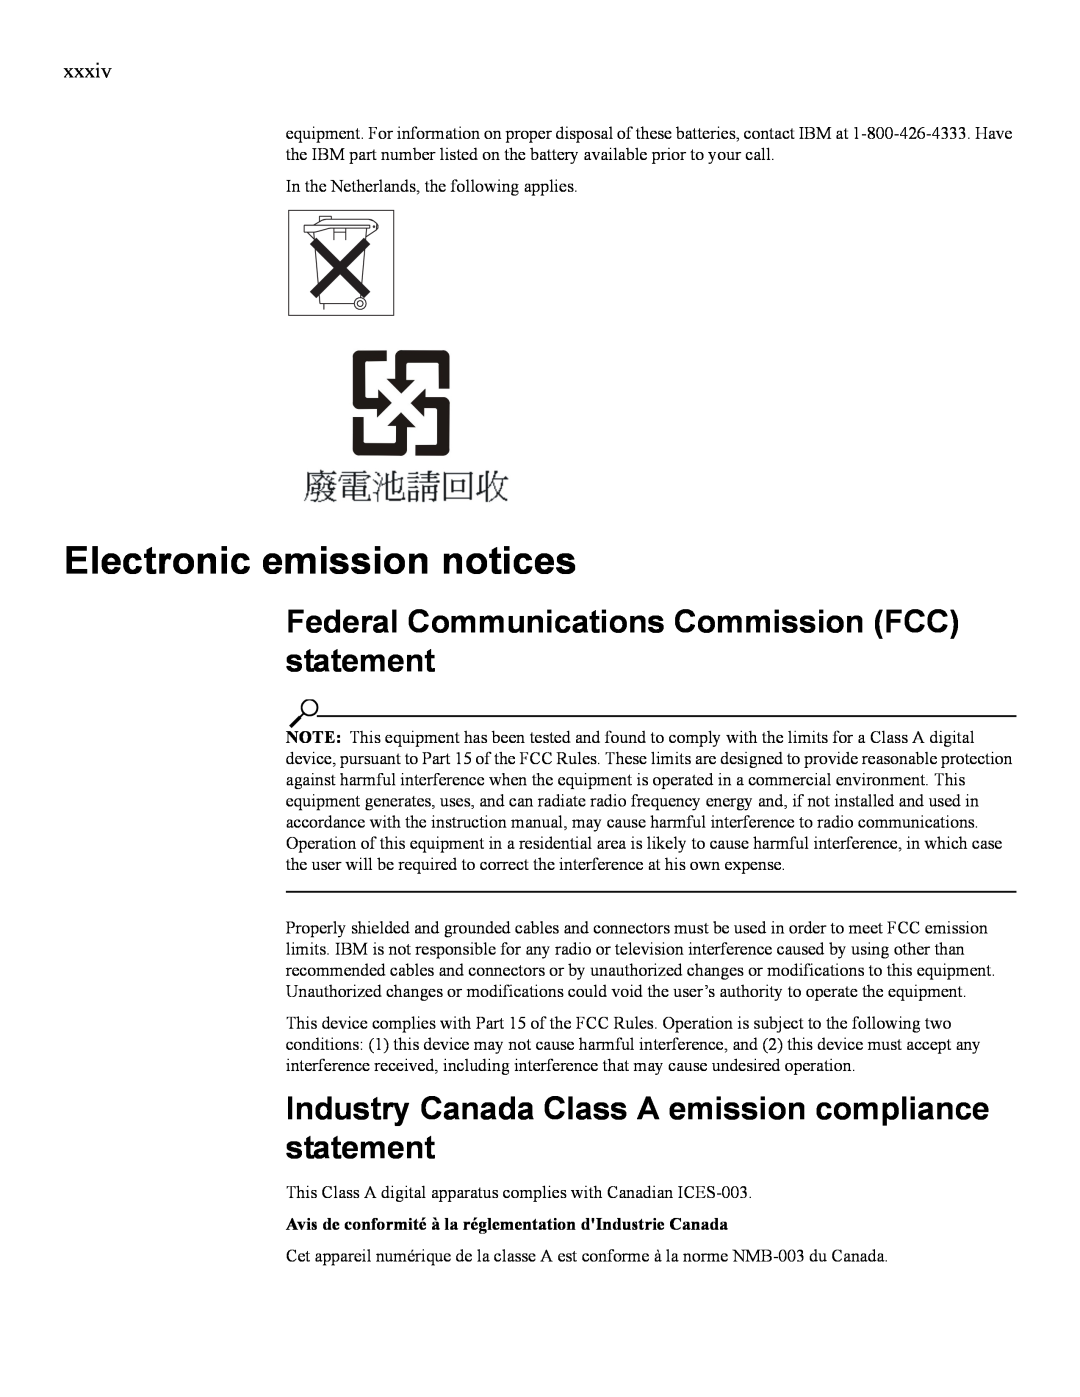 IBM 24R9718 IB manual Electronic emission notices, Federal Communications Commission FCC statement 